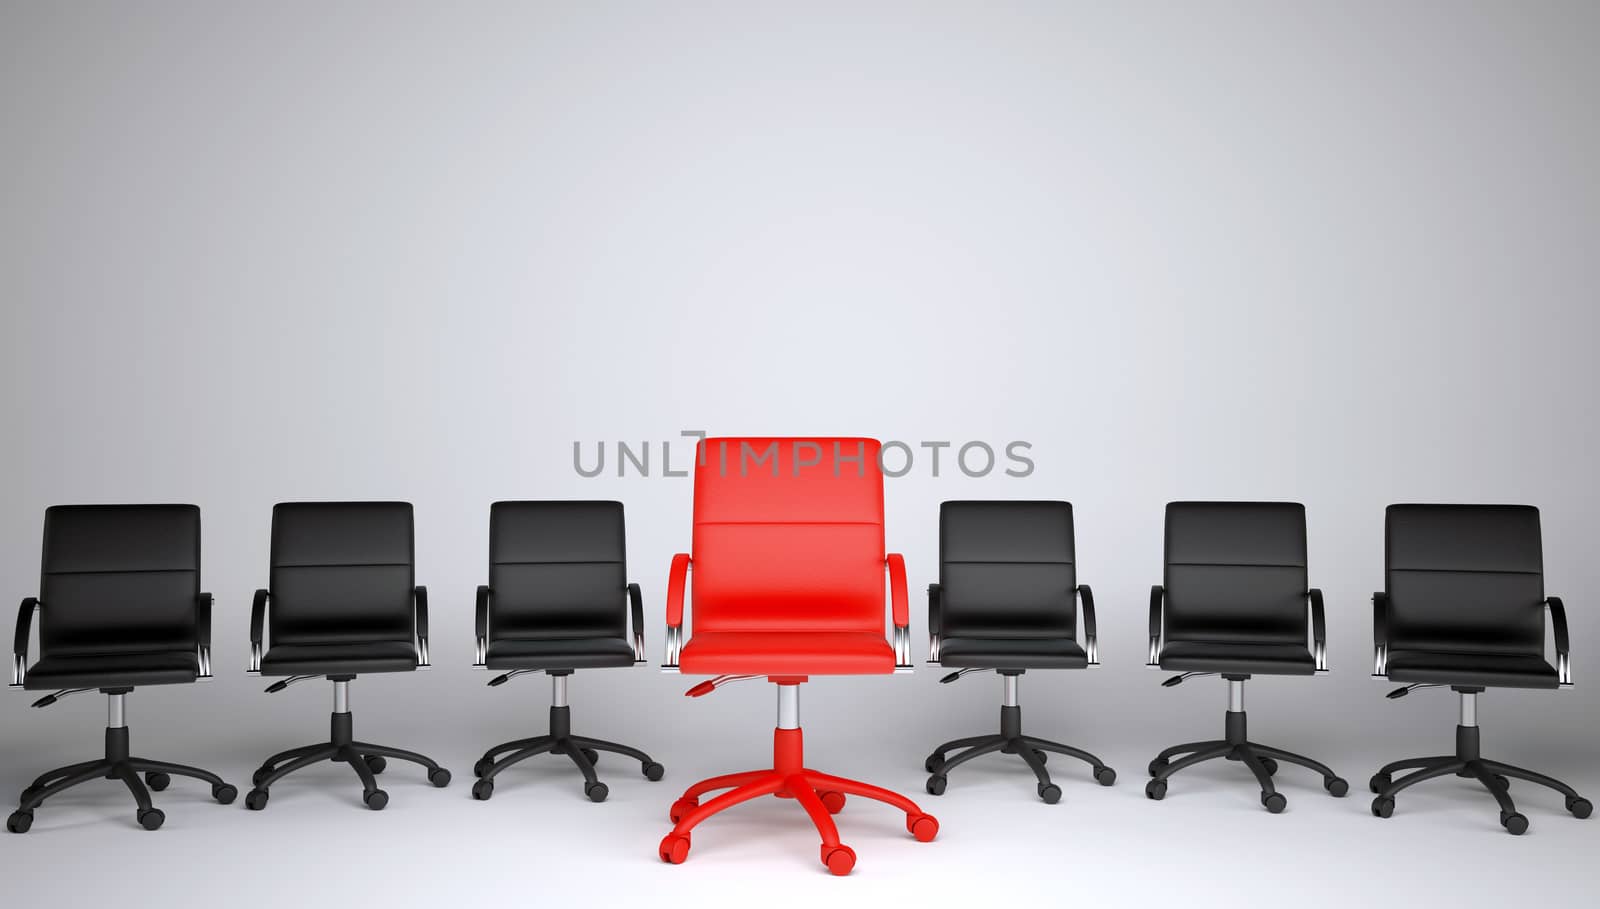 Series of black and one red office chair by cherezoff